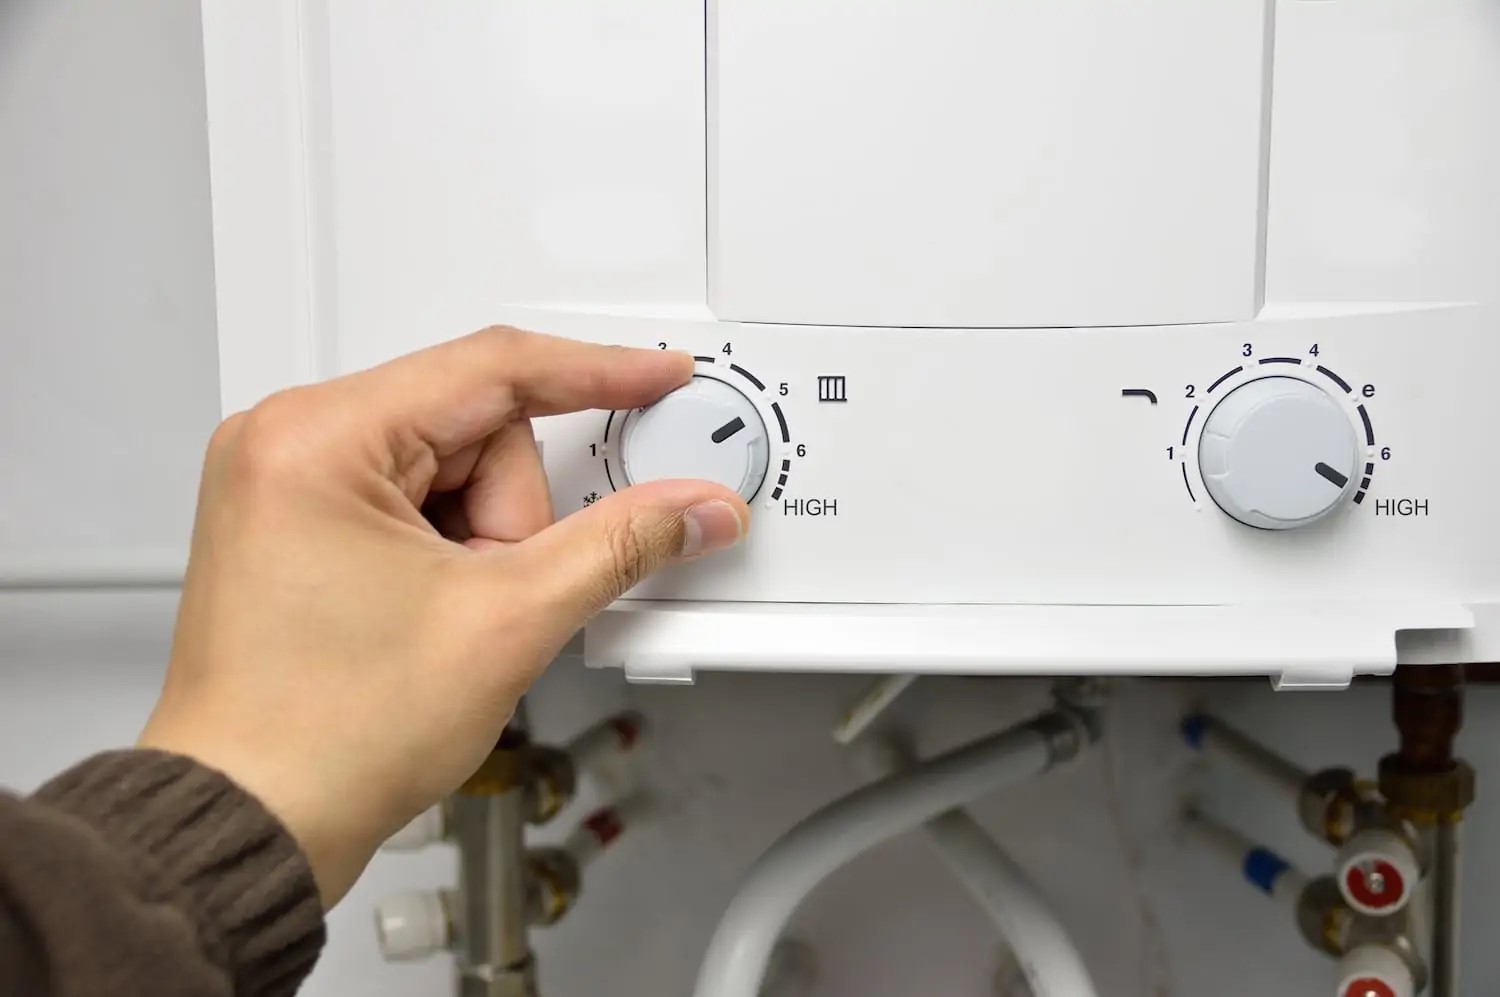 Hand adjusting settings on a water heater.